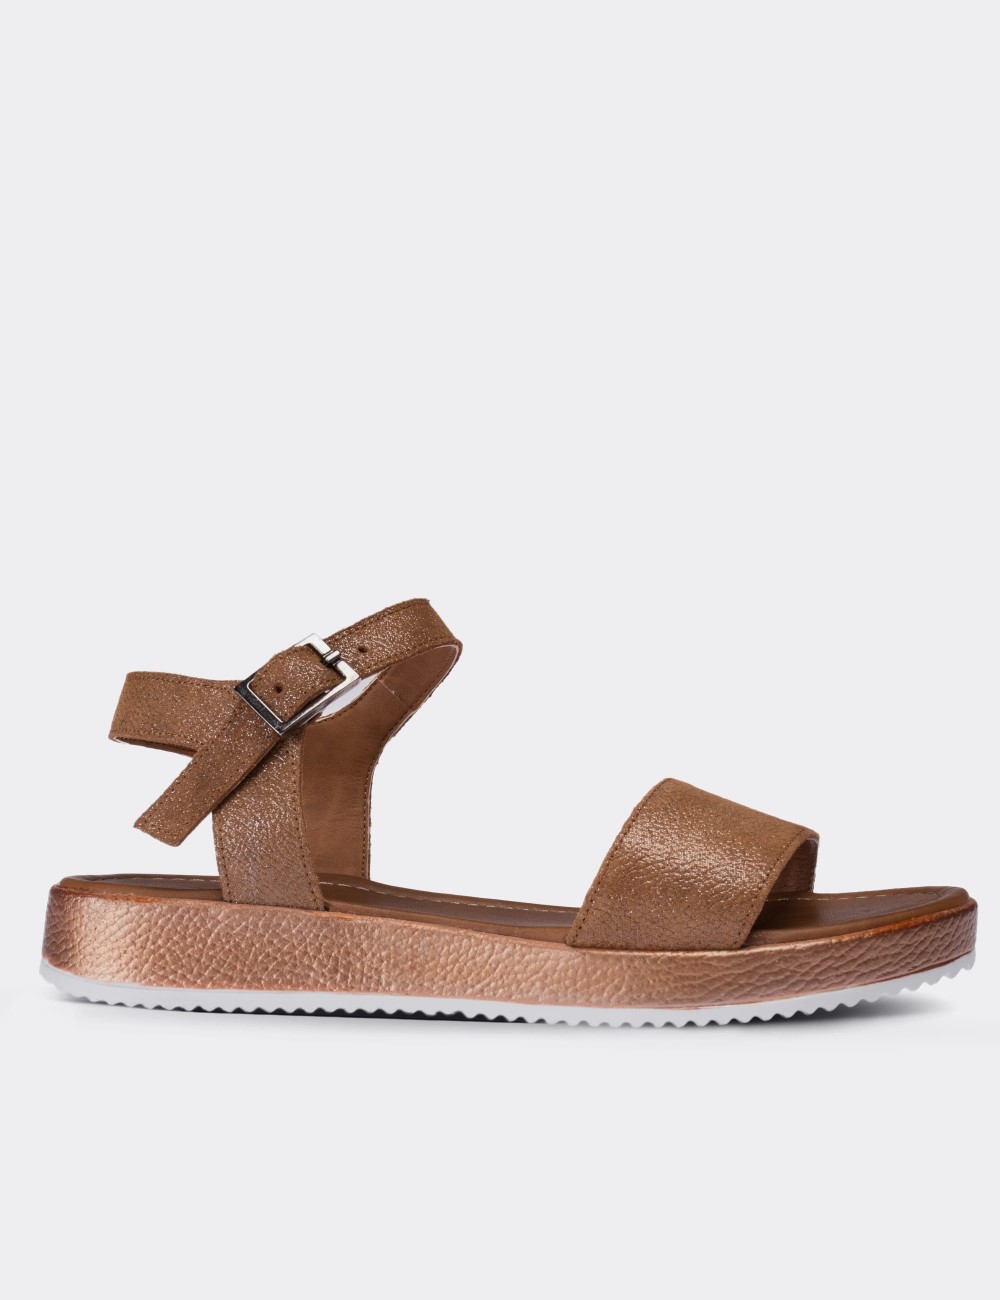 Tan  Leather Sandals - 02120ZTBAC02